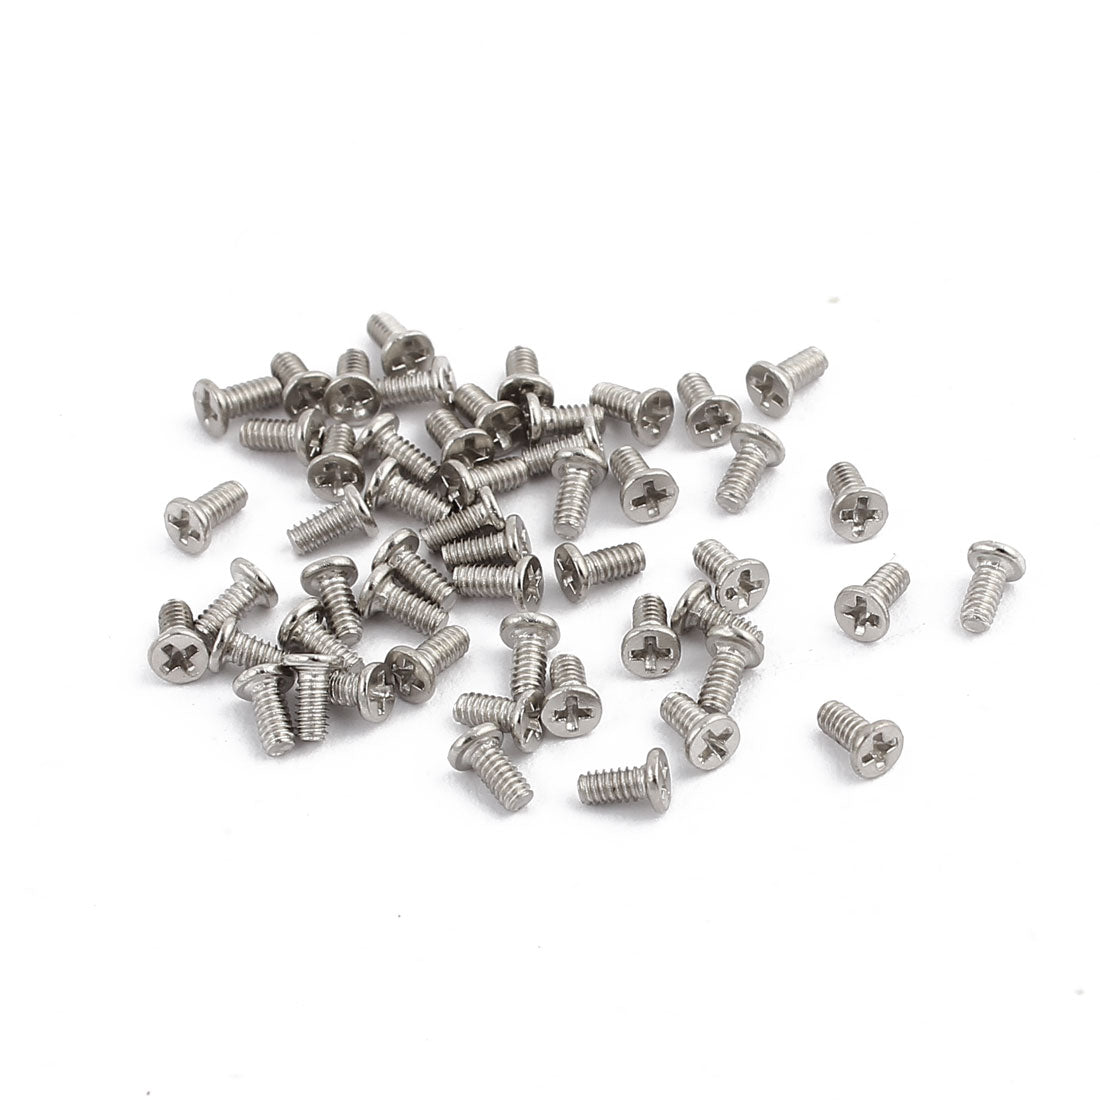 uxcell Uxcell 50Pcs M1.5 x 3mm Stainless Steel Countersunk Flat Head Phillips Machine Screw